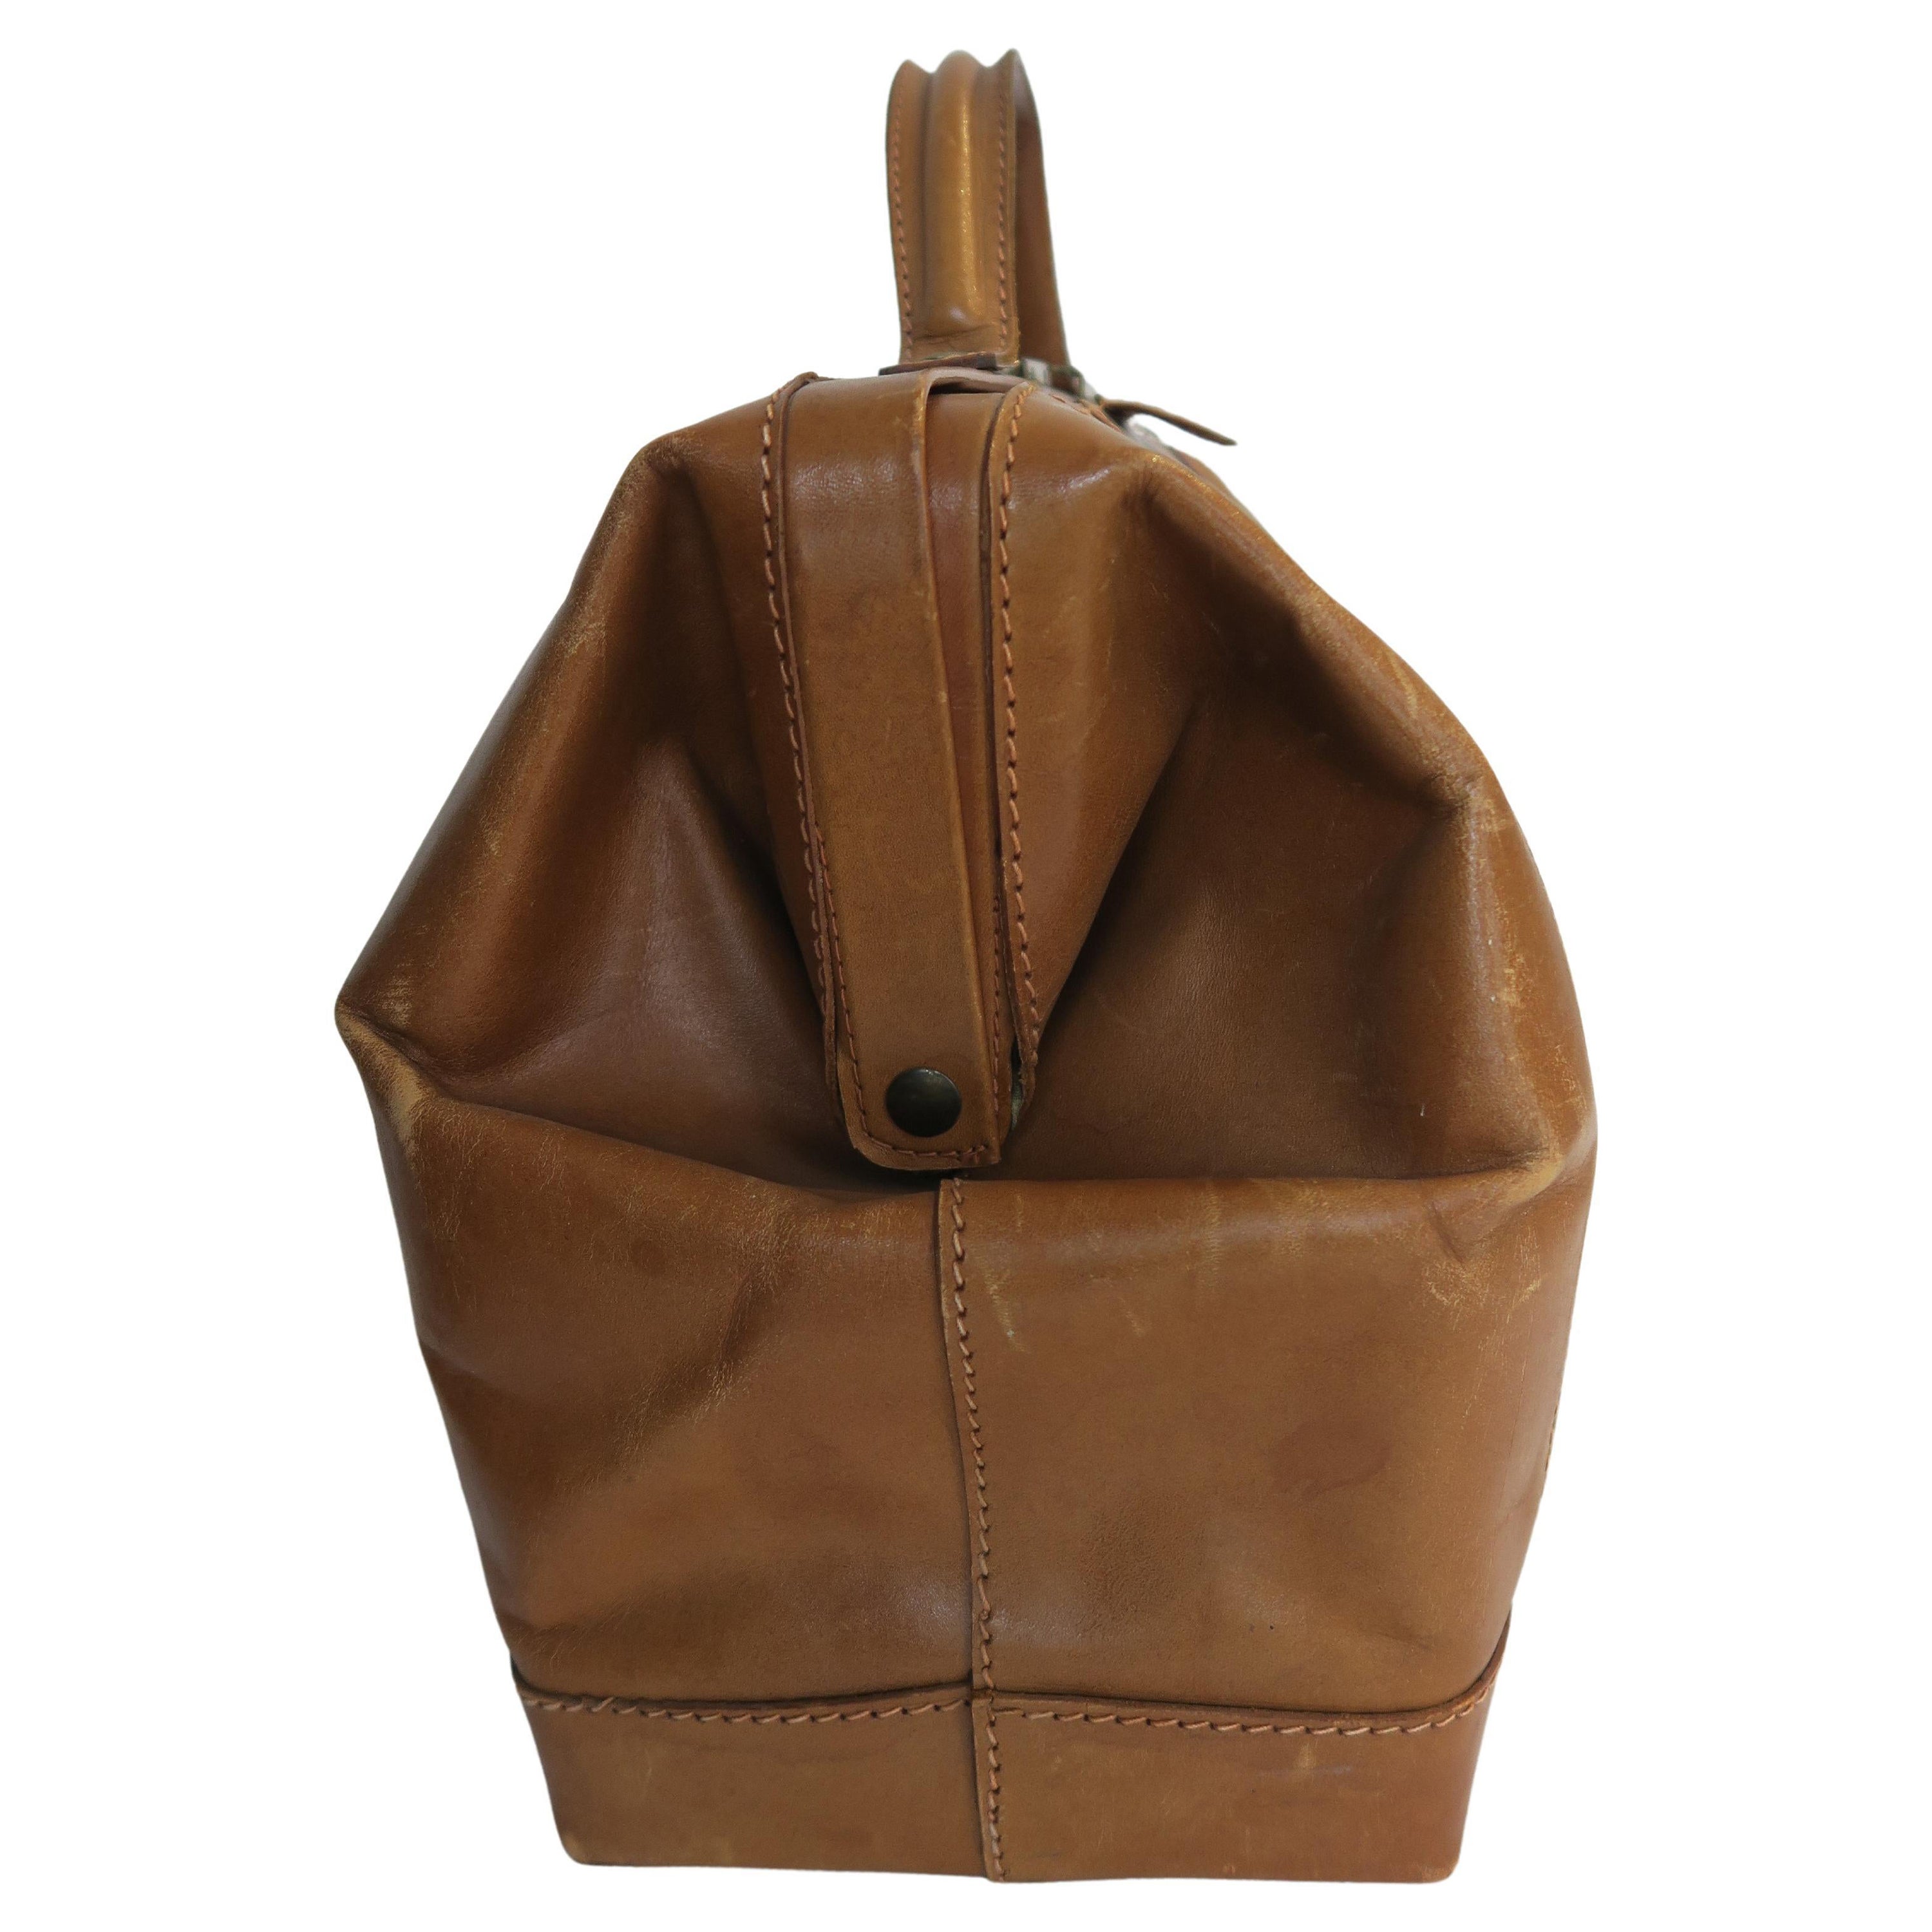 Excellent Condition Leather Medicinal Bag Made in Vienna, 1950/1960